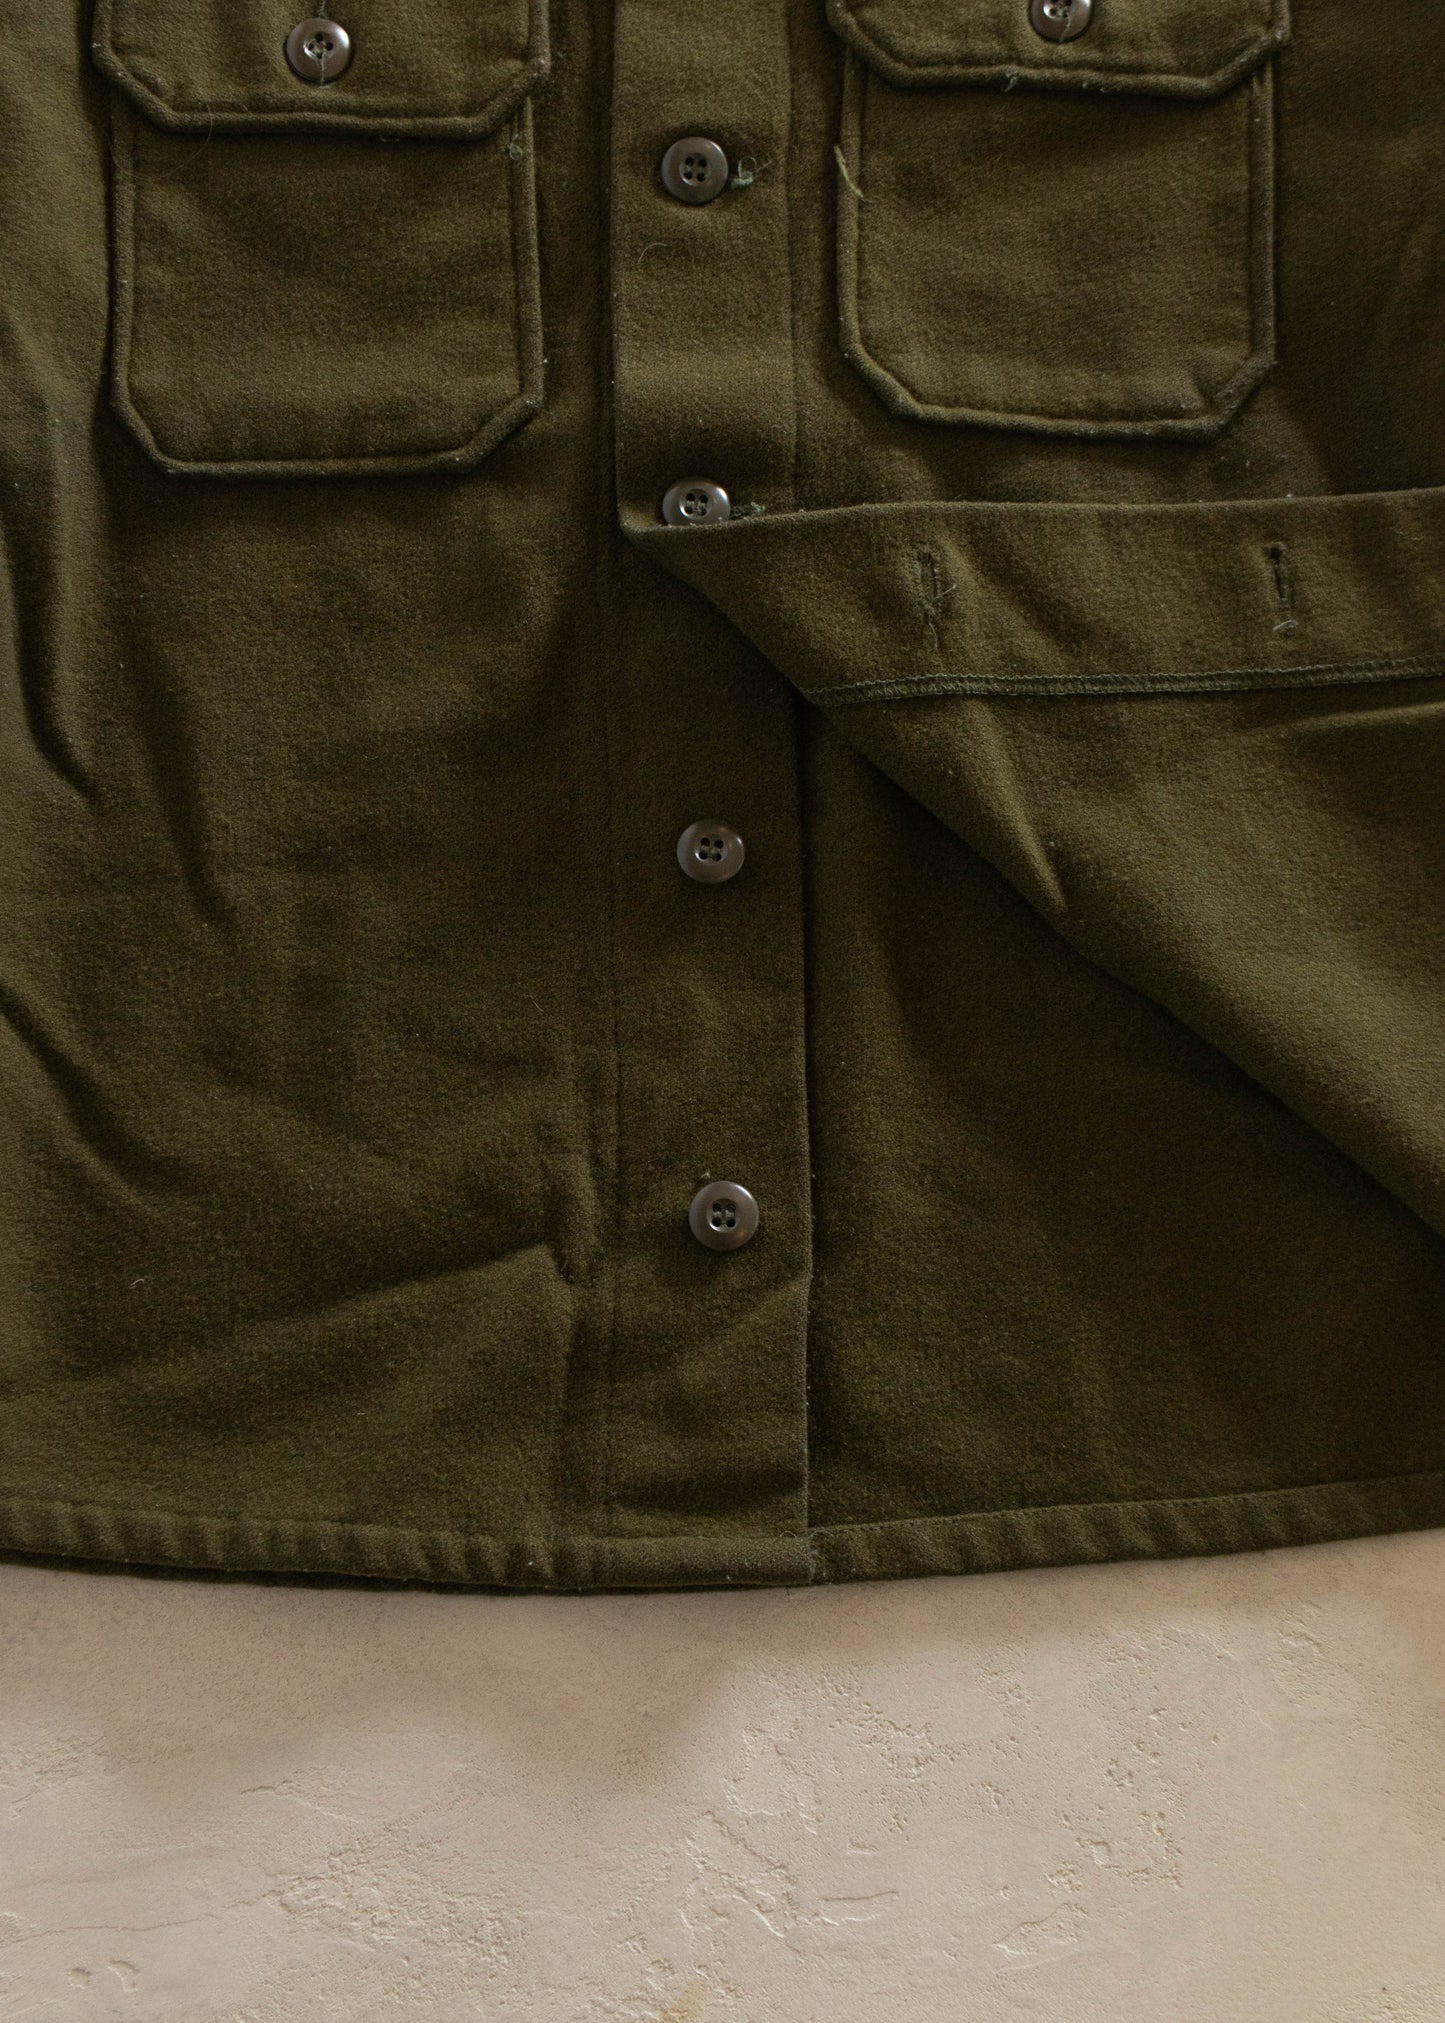 1980s Military OG 108 Wool Button Up Shirt Size M/L